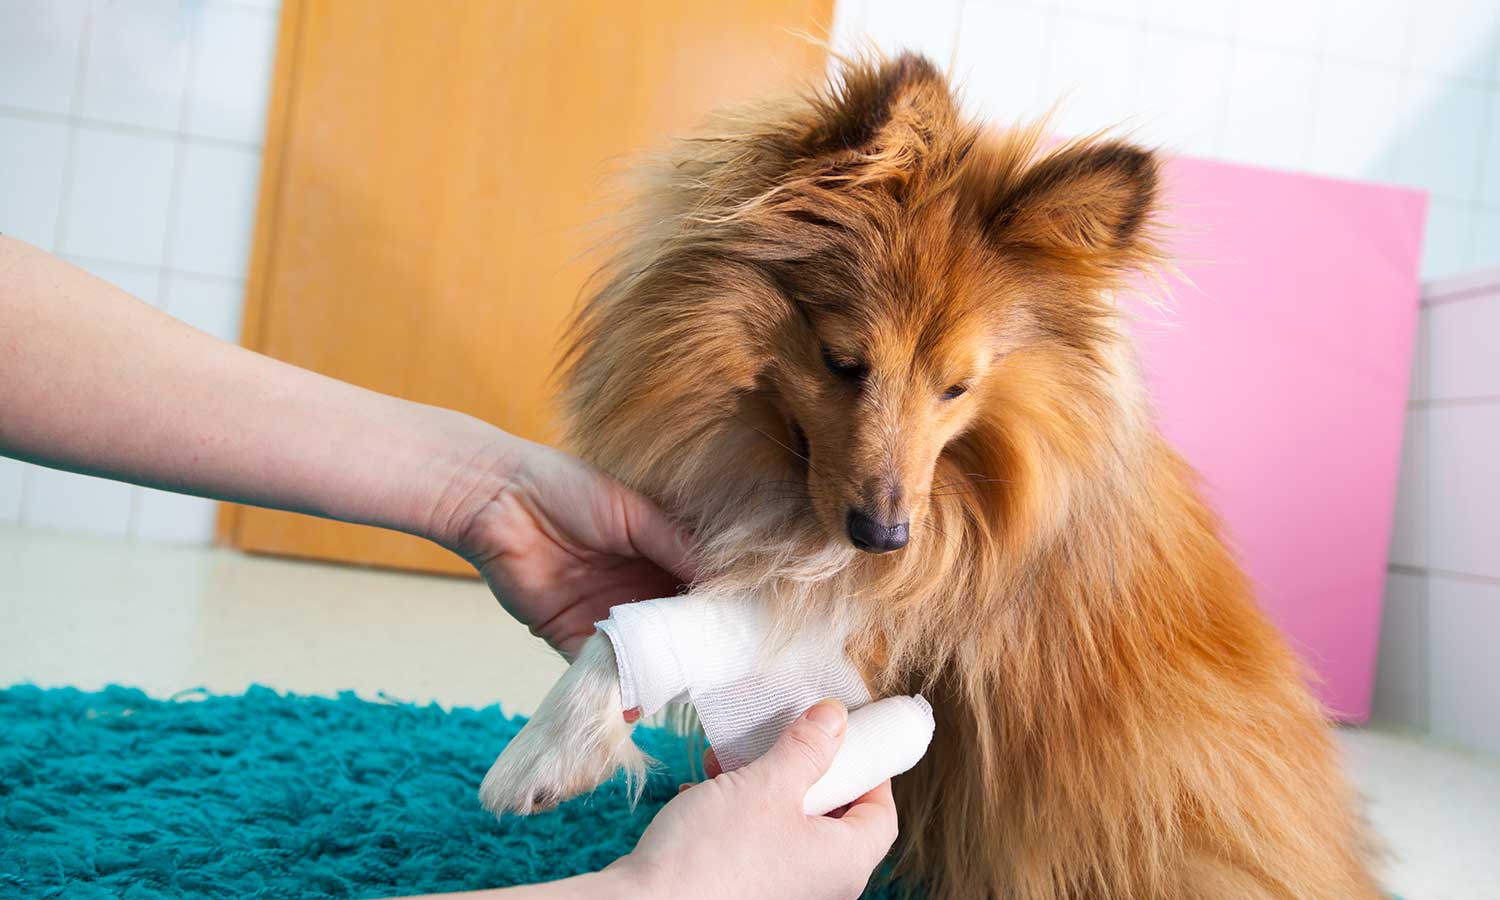 A sheltie being treated for an injured leg